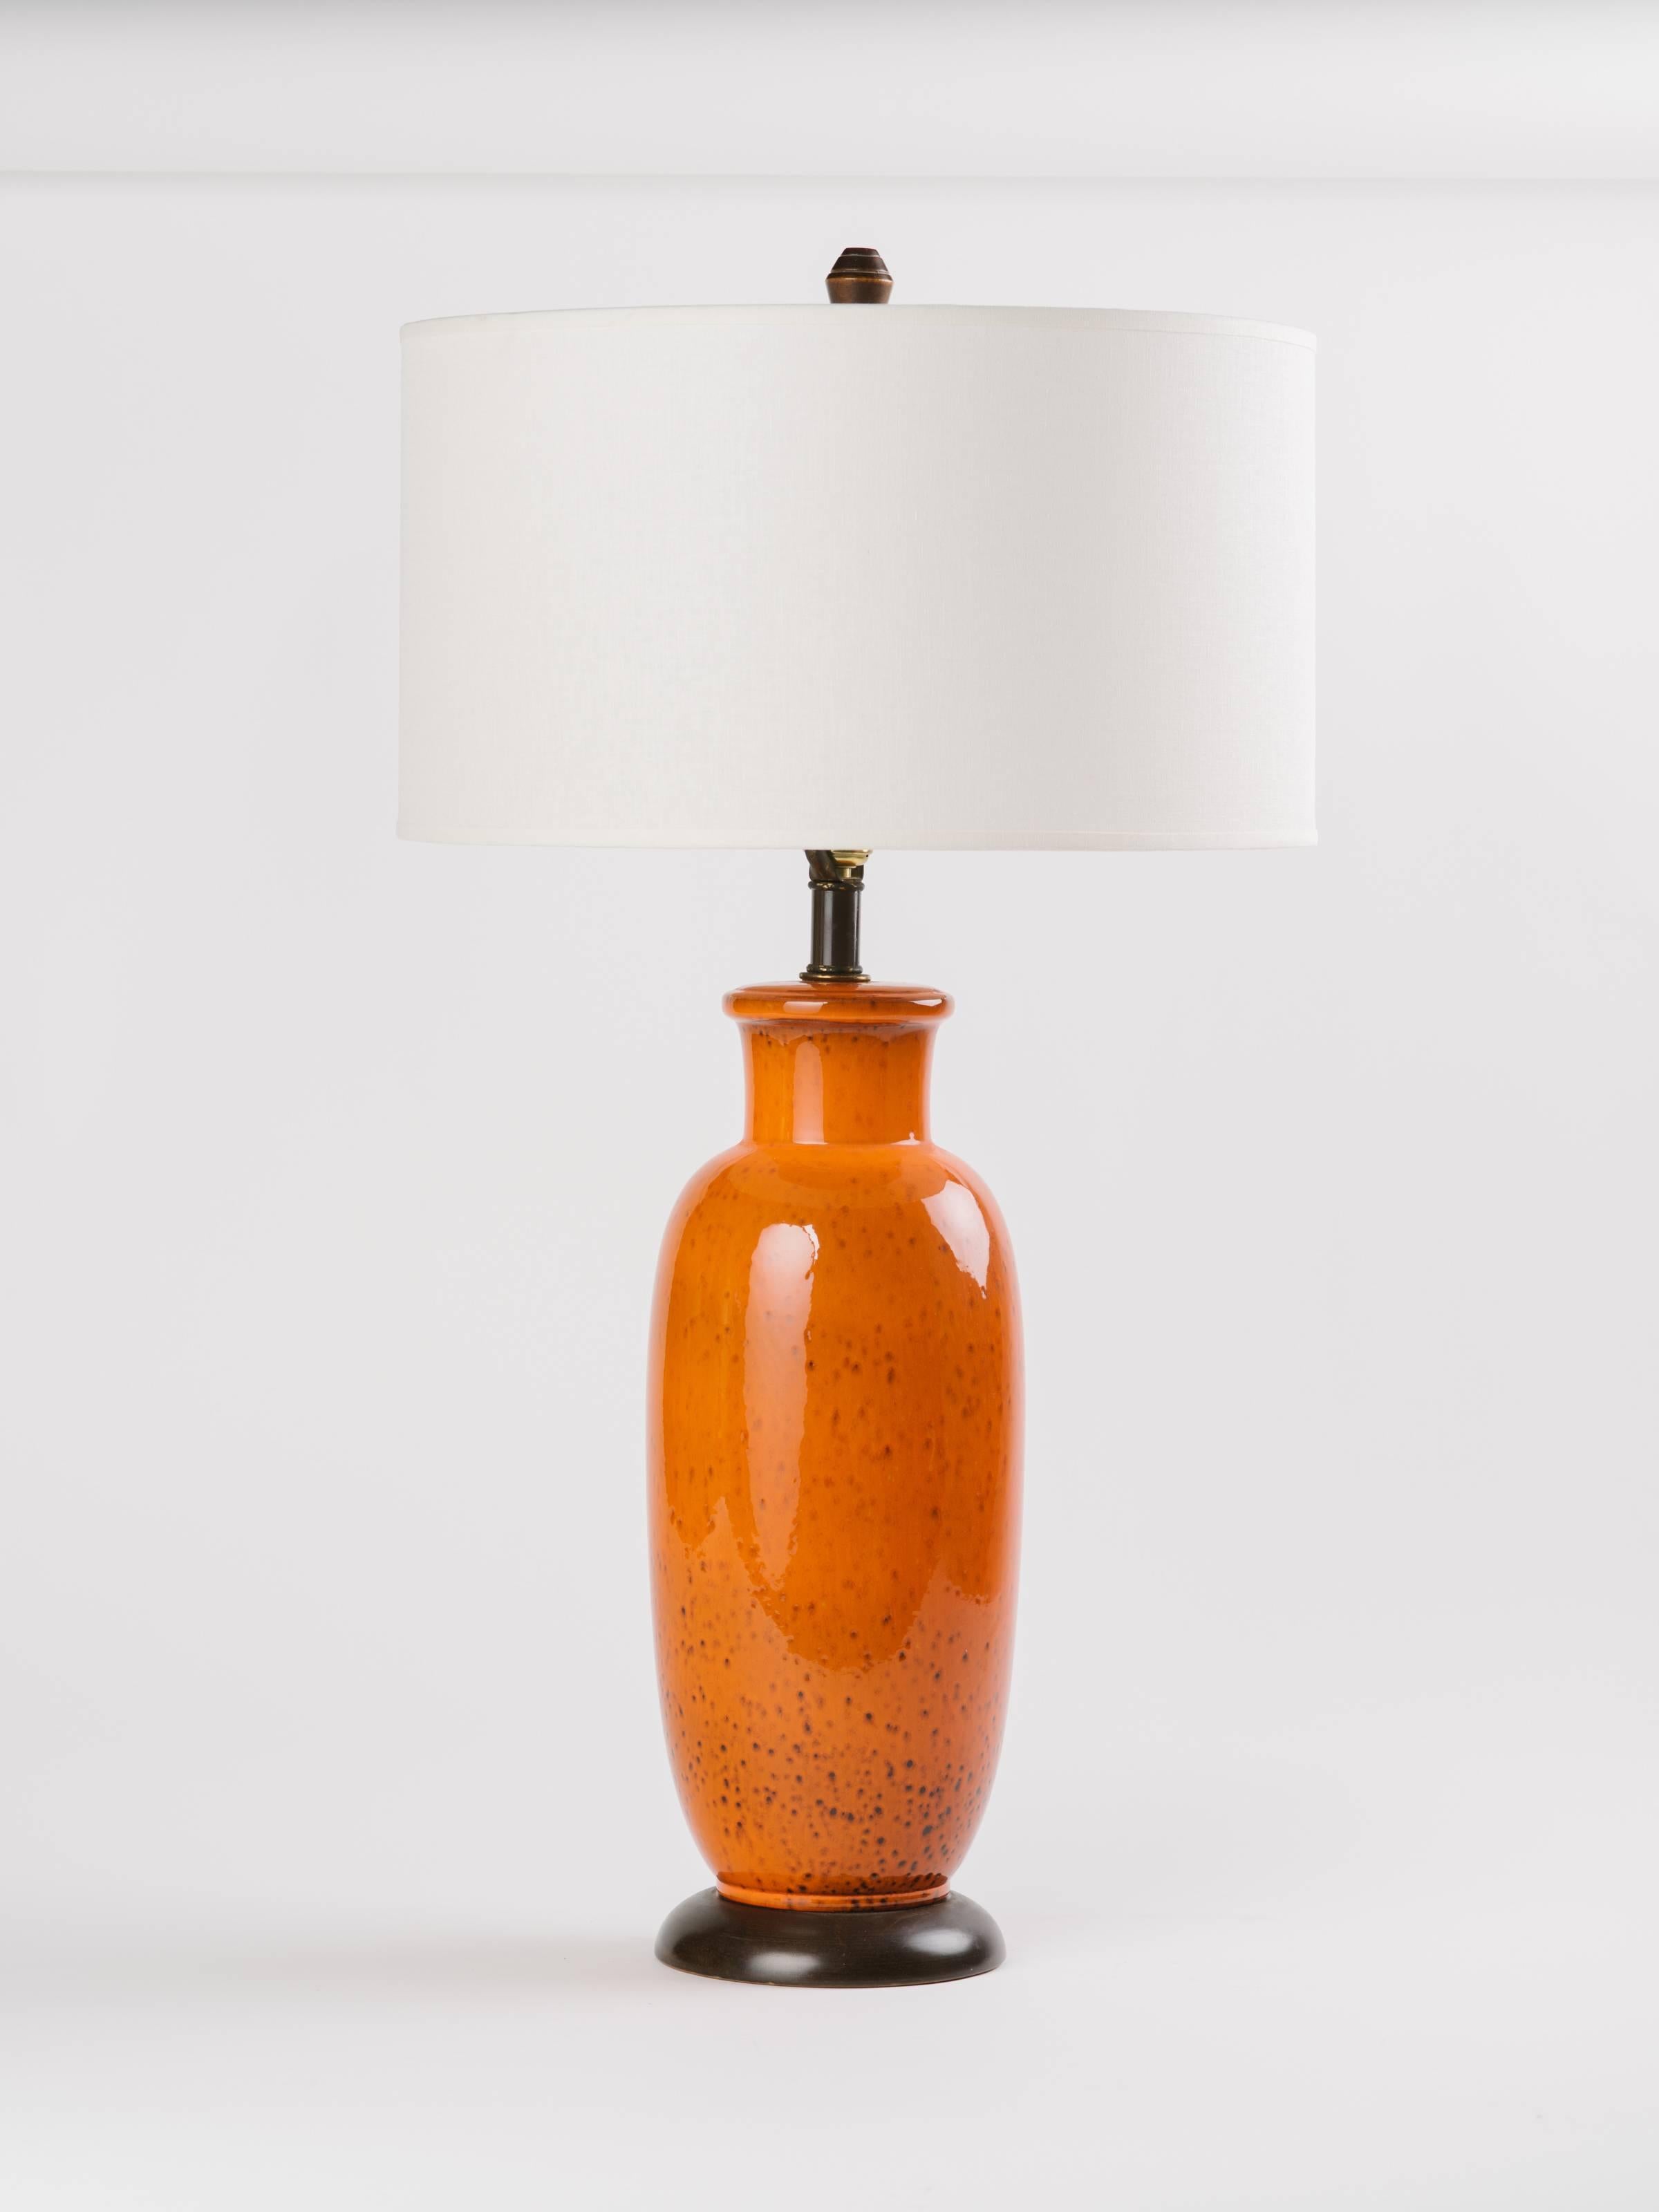 Pair of midcentury ceramic pottery lamps with glazed finish in vibrant burnt orange. Lamps have modern baluster forms with blackened dimples throughout. Walnut wood bases and shown with custom linen drum shades.